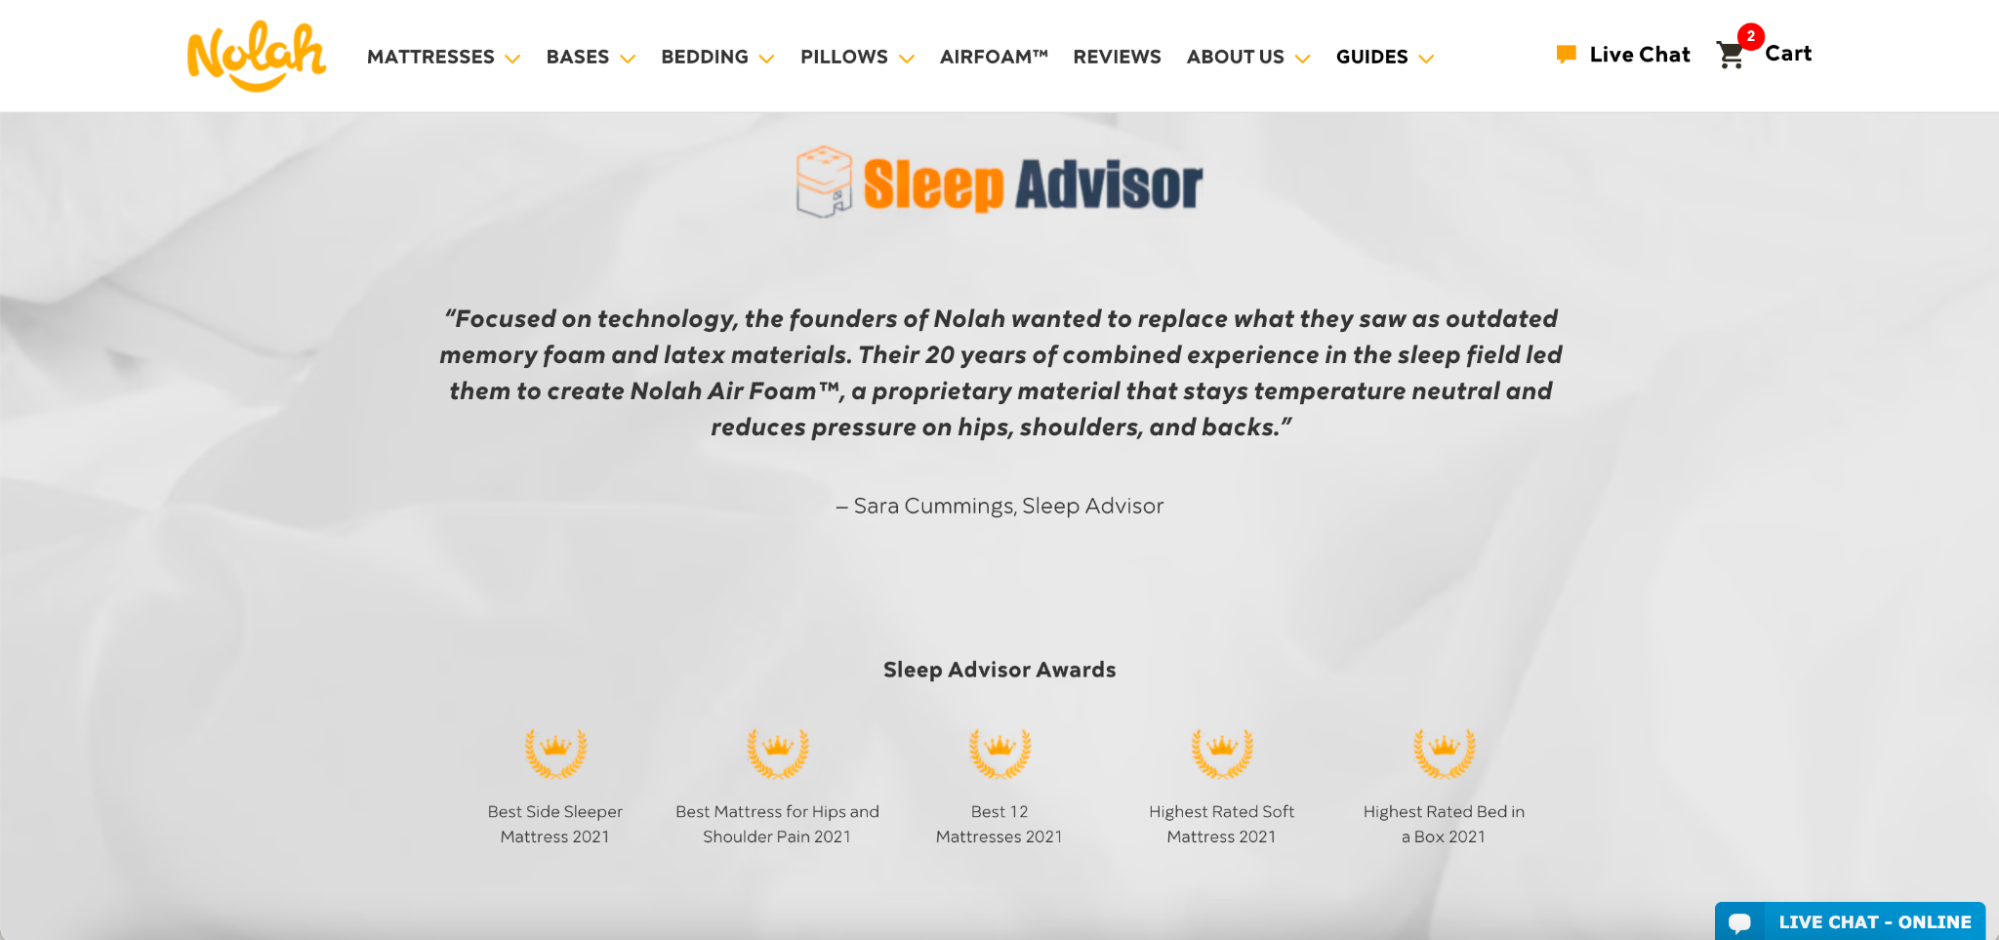 Review from Sleep Advisor with five different mattress-related awards.